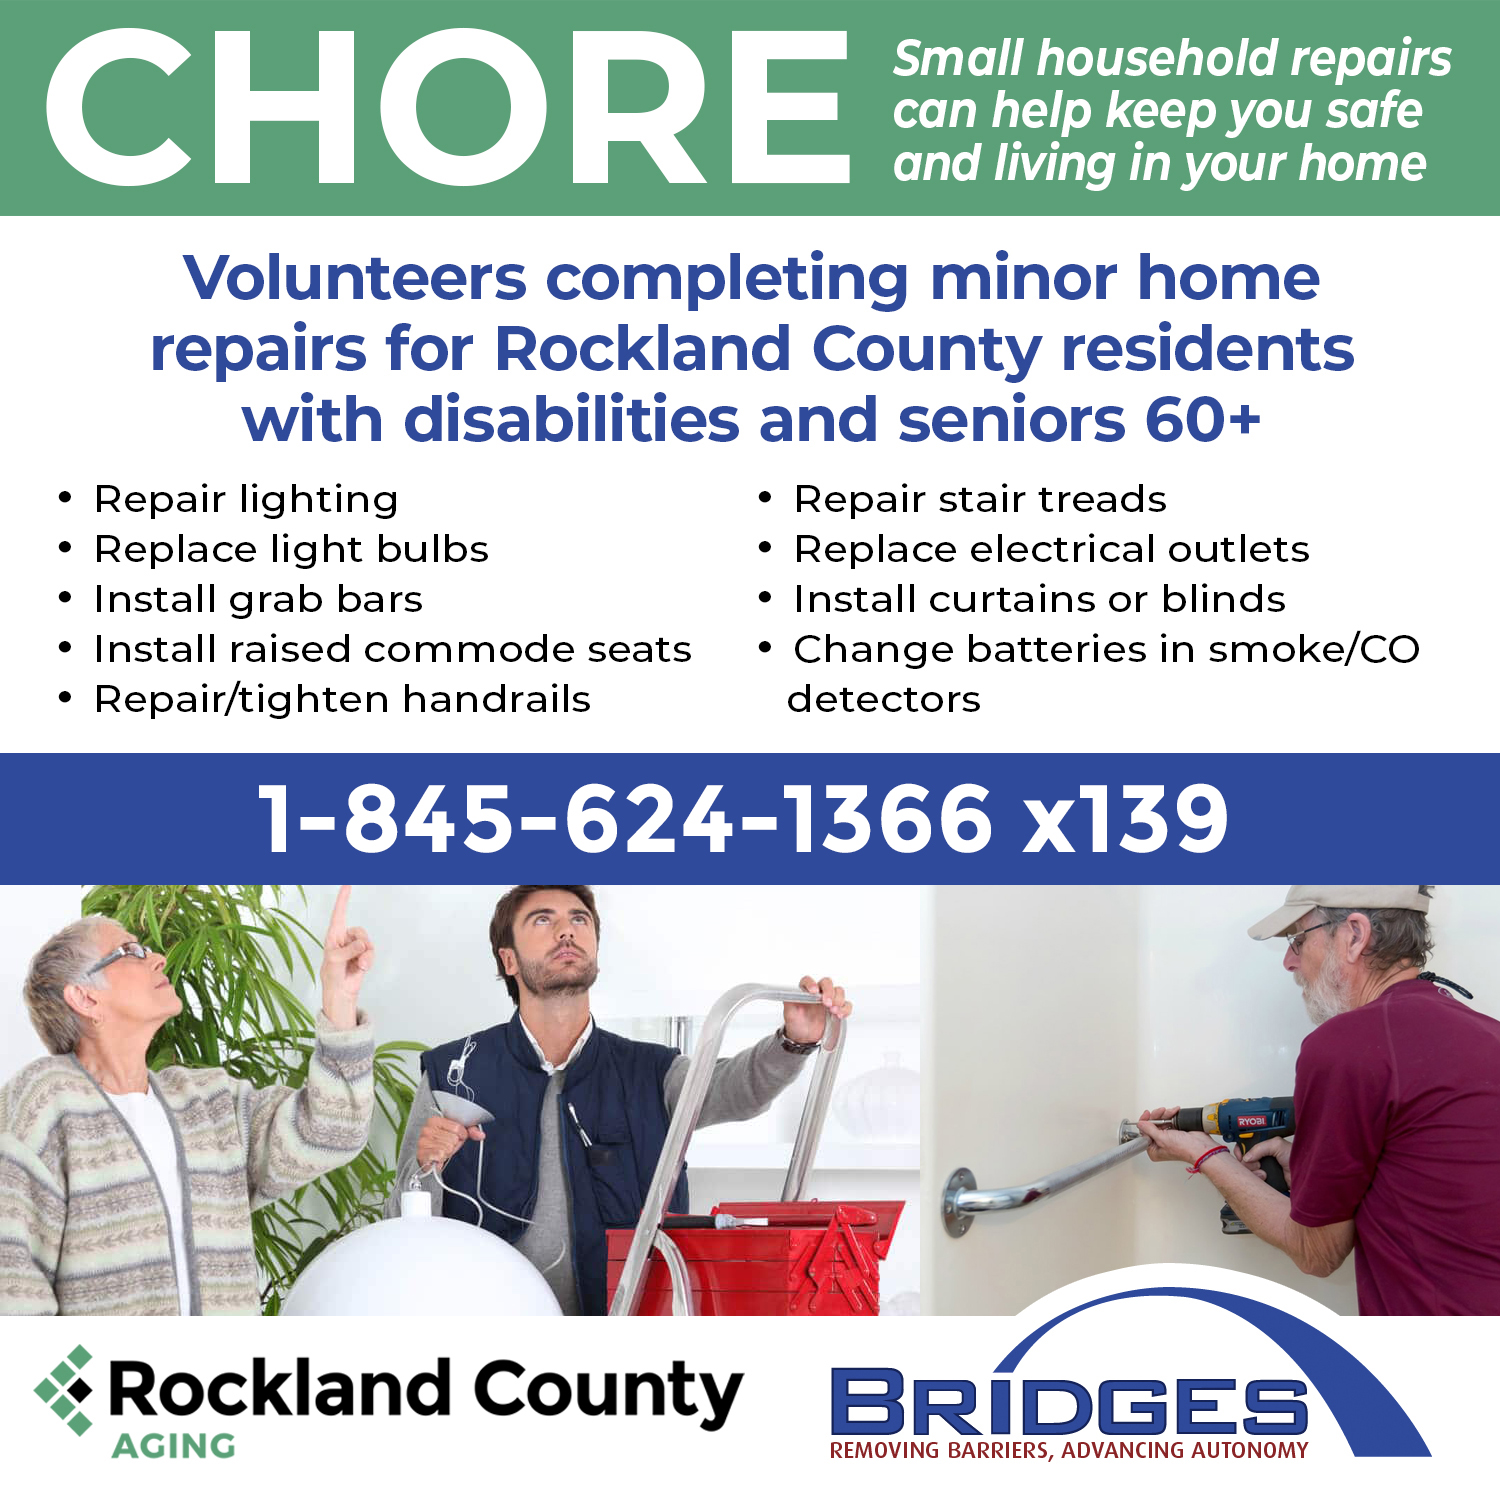 Chore. Small household repairs can help keep you safe and living at home. Volunteers completing minor home repairs for Rockland County residents with disabilities and seniors 60 plus. Repair lighting, repair stair treads, replace light bulbs, replace electrical outlets, install grab bars, install curtains or blinds, install raised commode seats, change batteries in smoke or CO detectors, repair or tighten handrails. 845-624-1366 extension 139. A man helping an older woman, a man drilling handrail into the wall.